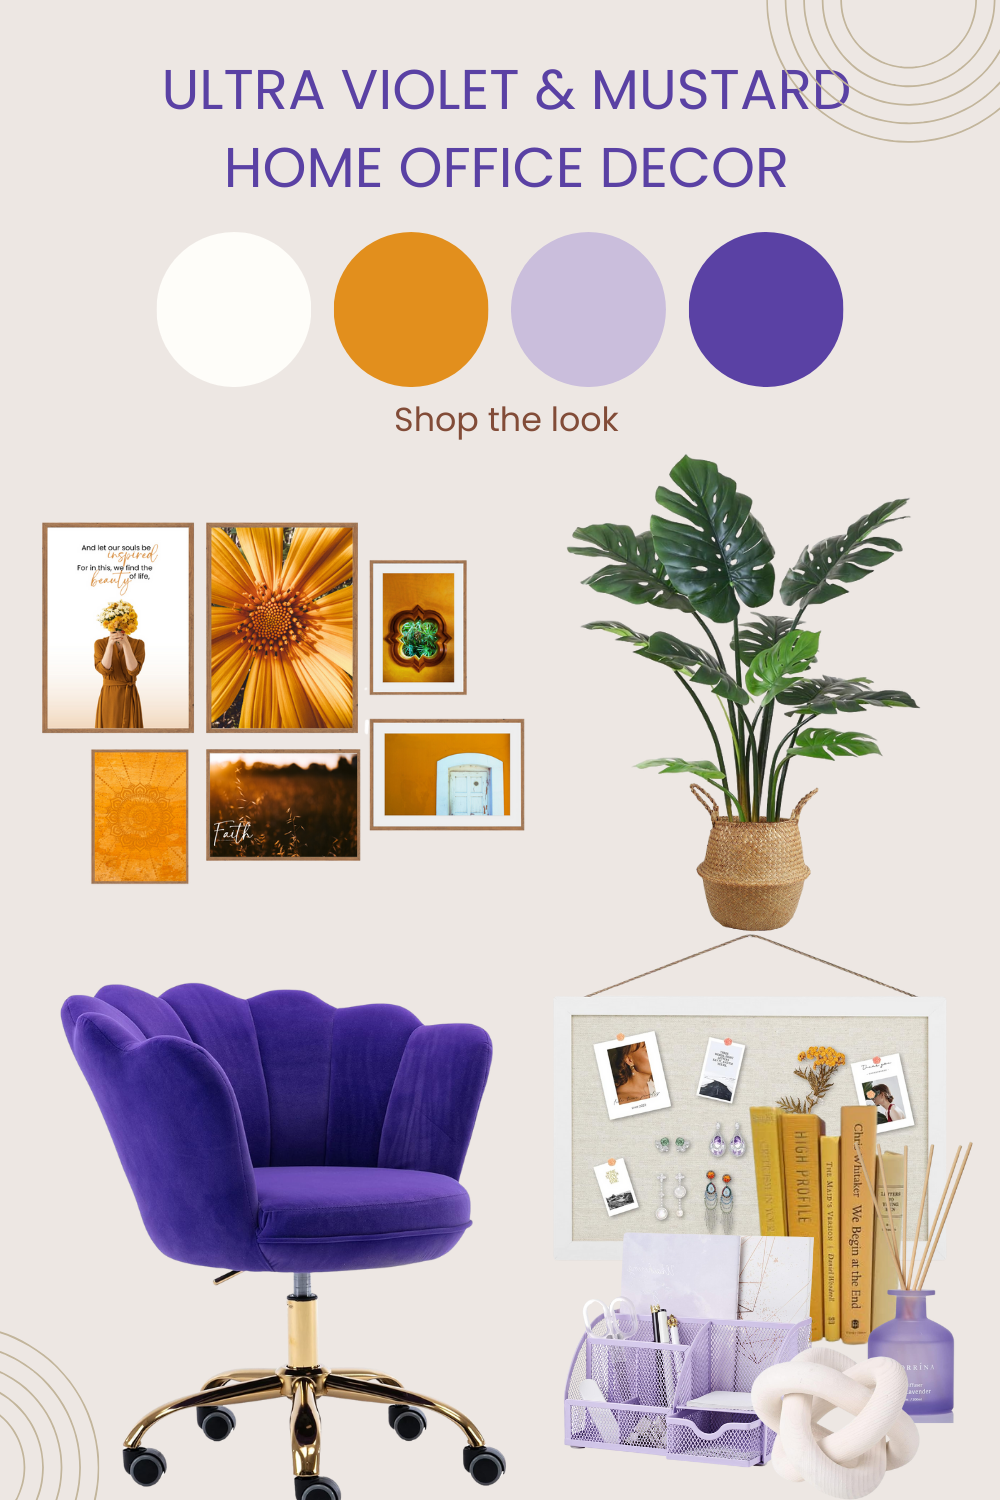 Ultra Violet & Mustard Moodboard for a home office